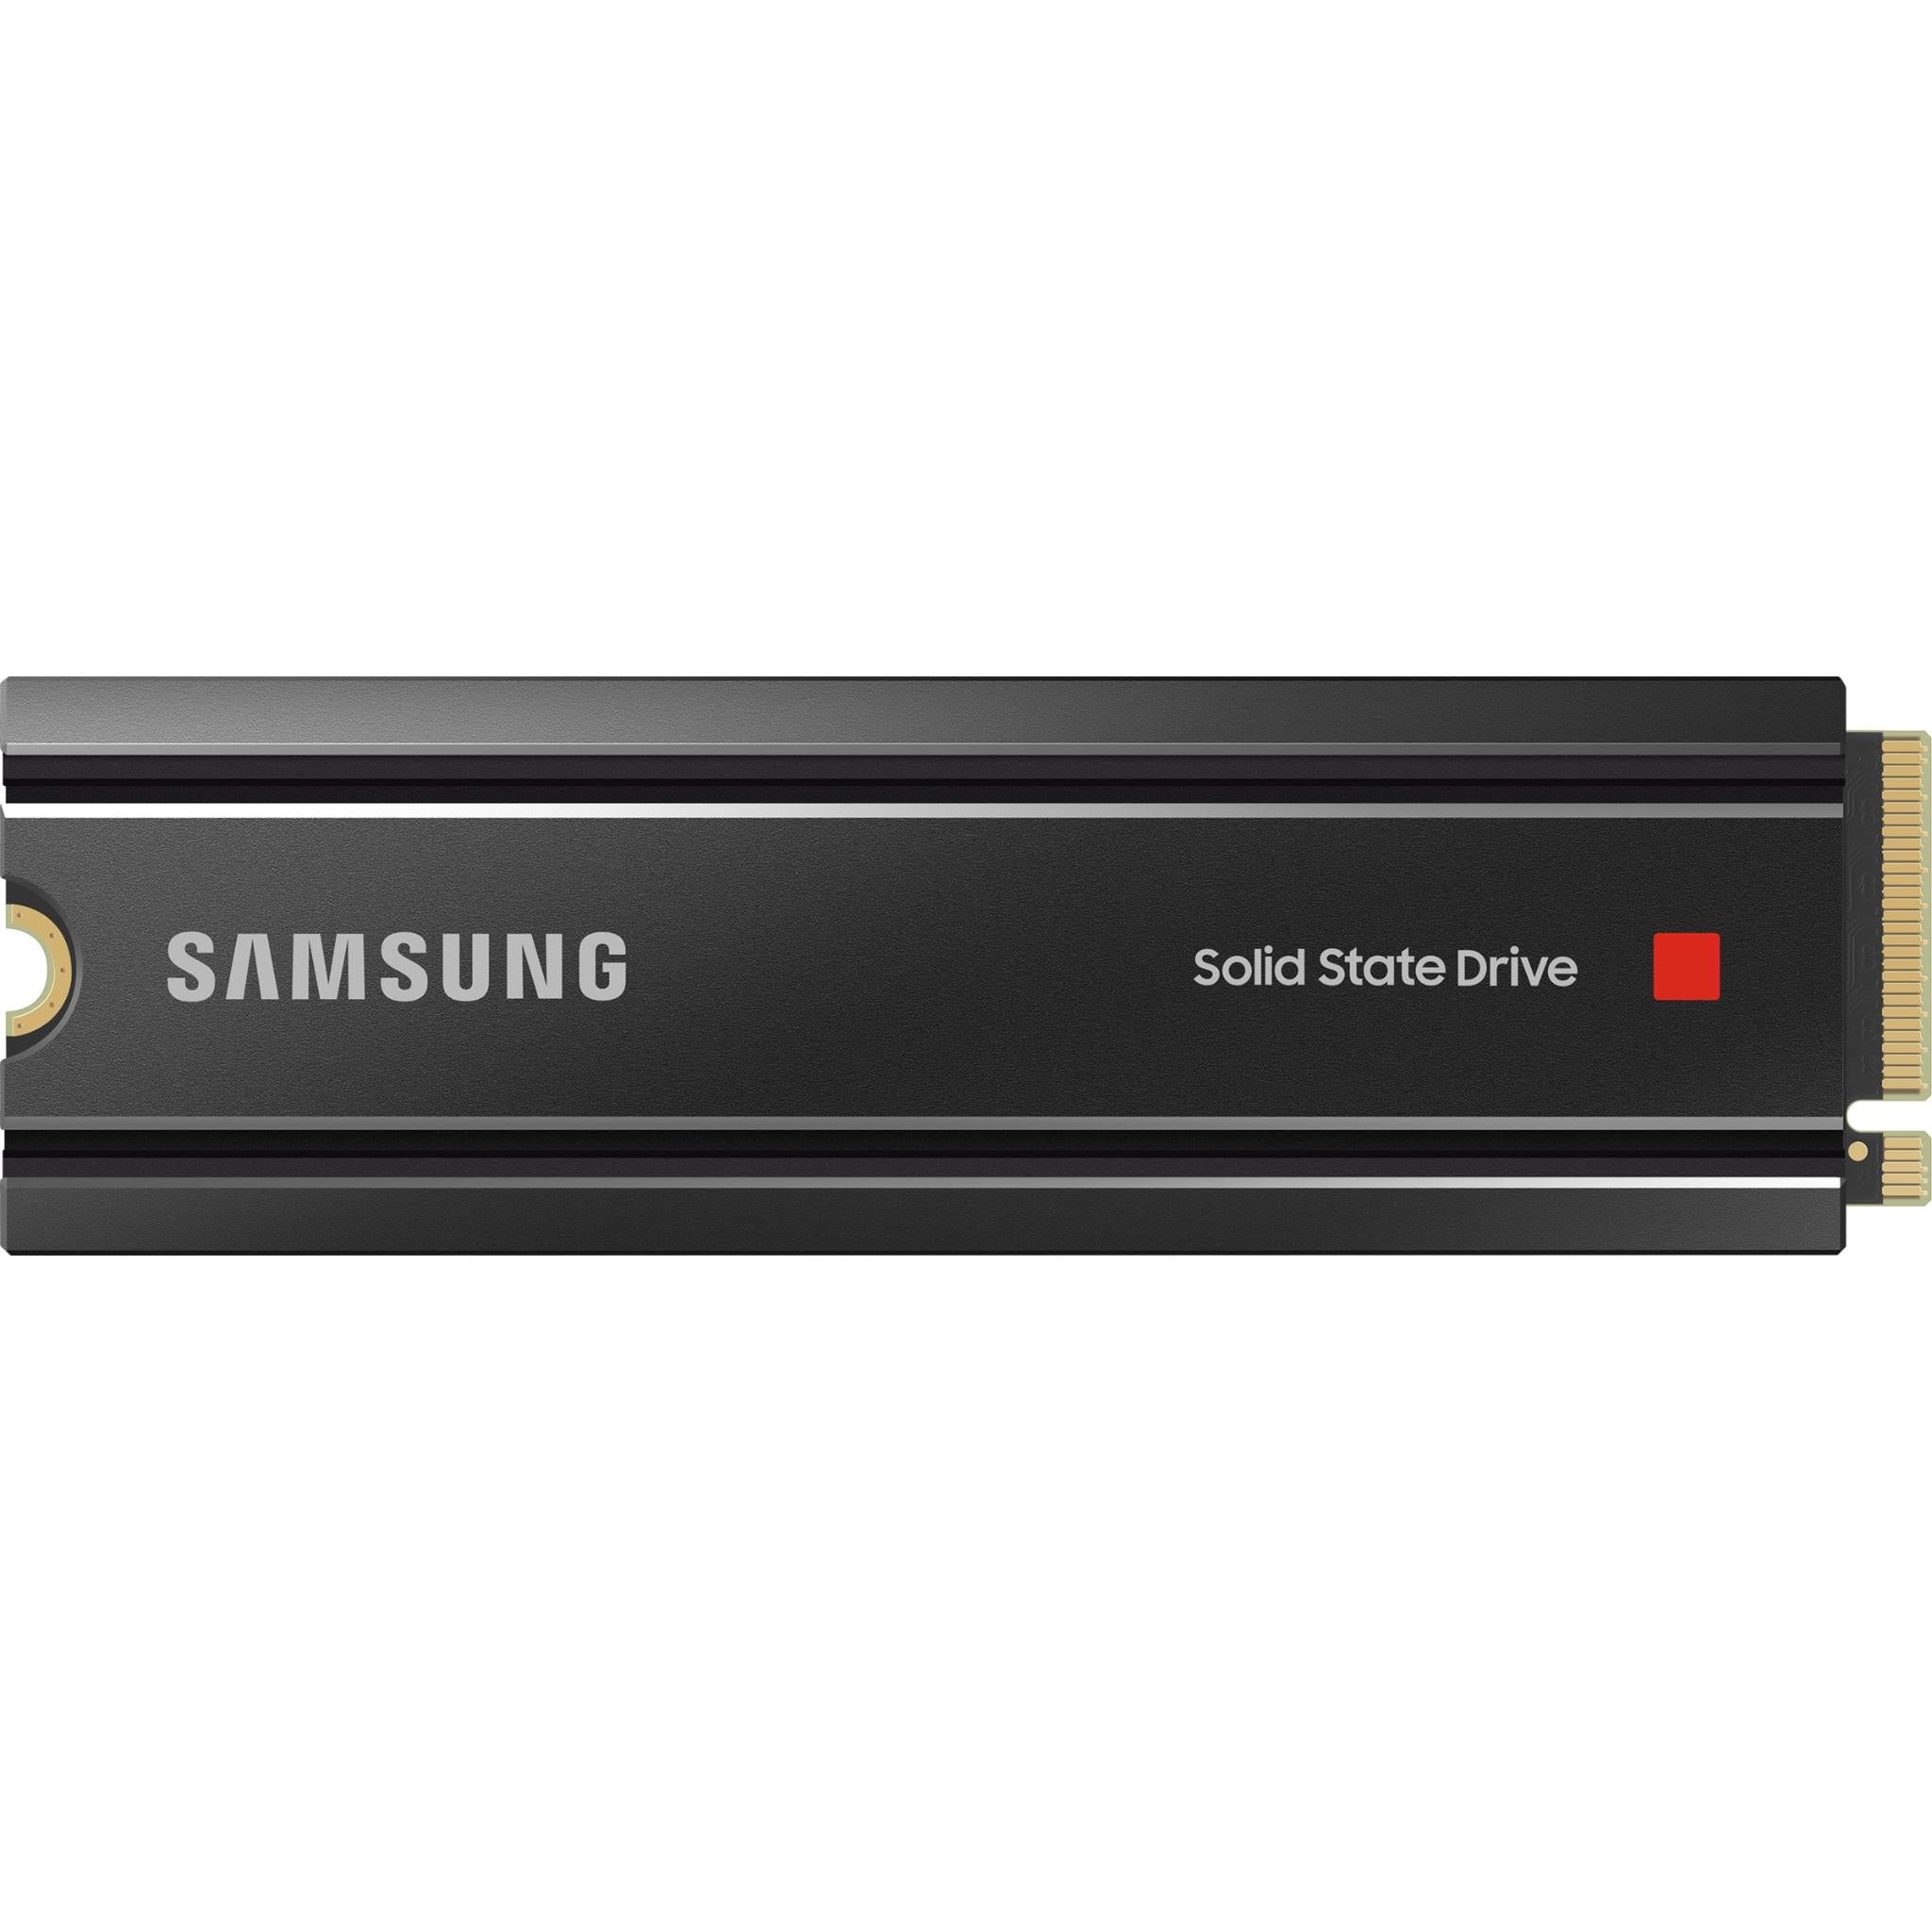 PS5 Compatible SSD Drive